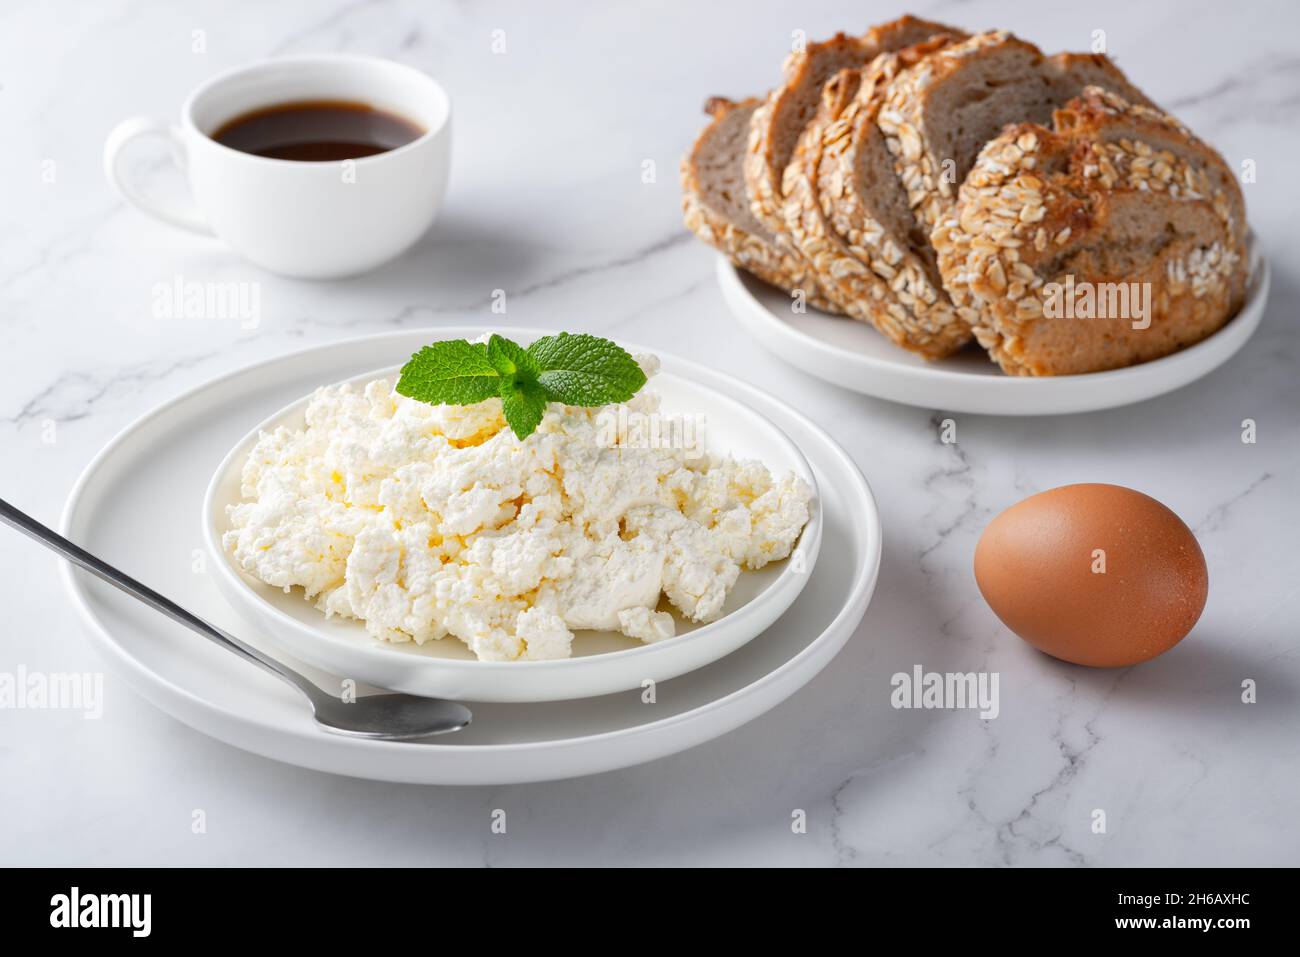 A bowl with fresh cottage cheese, rye bread and coffee on the table. Stock Photo